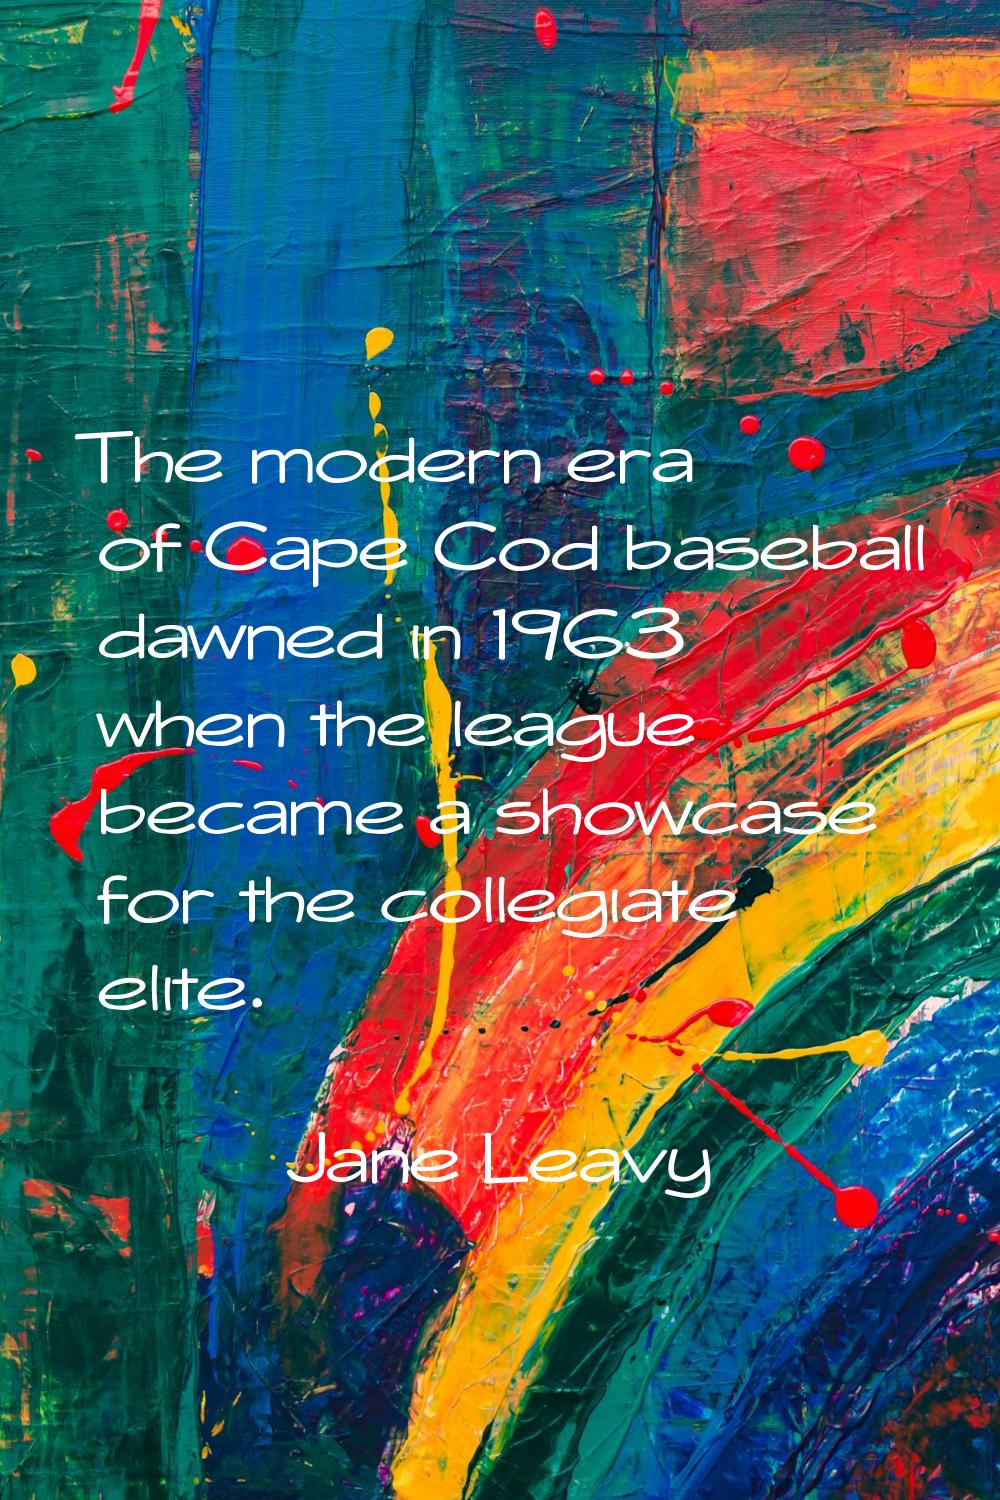 The modern era of Cape Cod baseball dawned in 1963 when the league became a showcase for the colleg